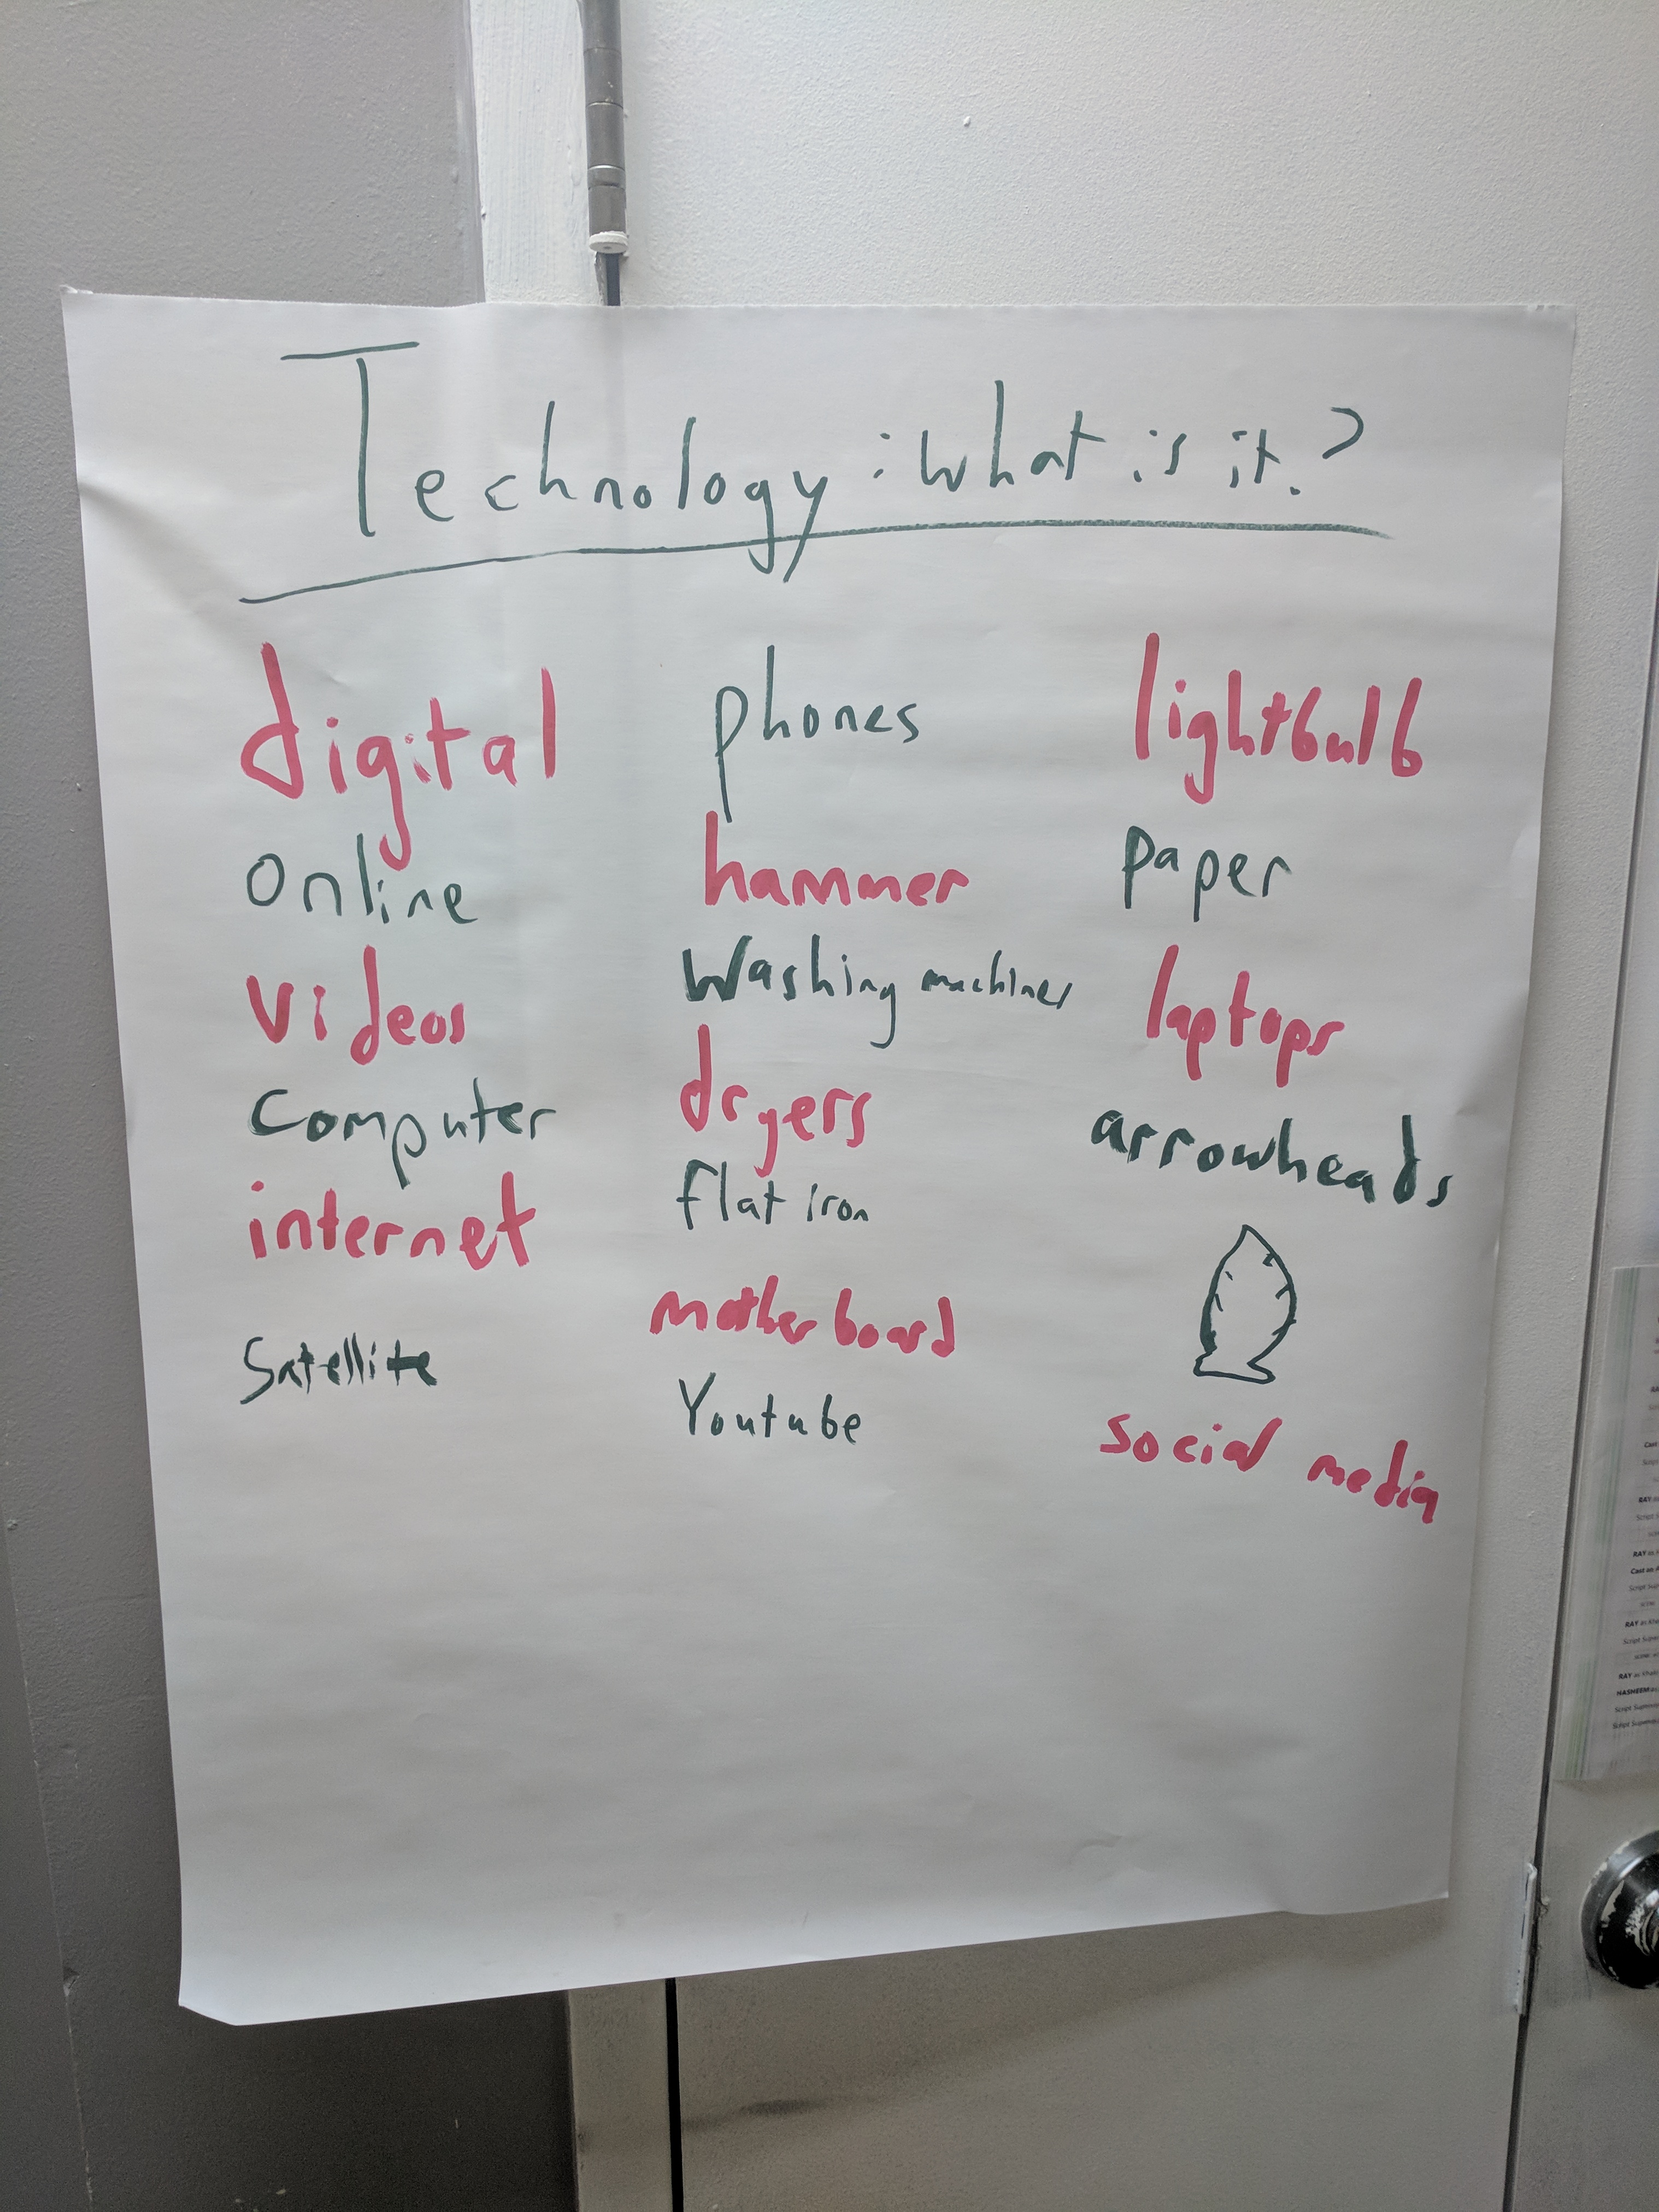 brainstorm of different examples of technology